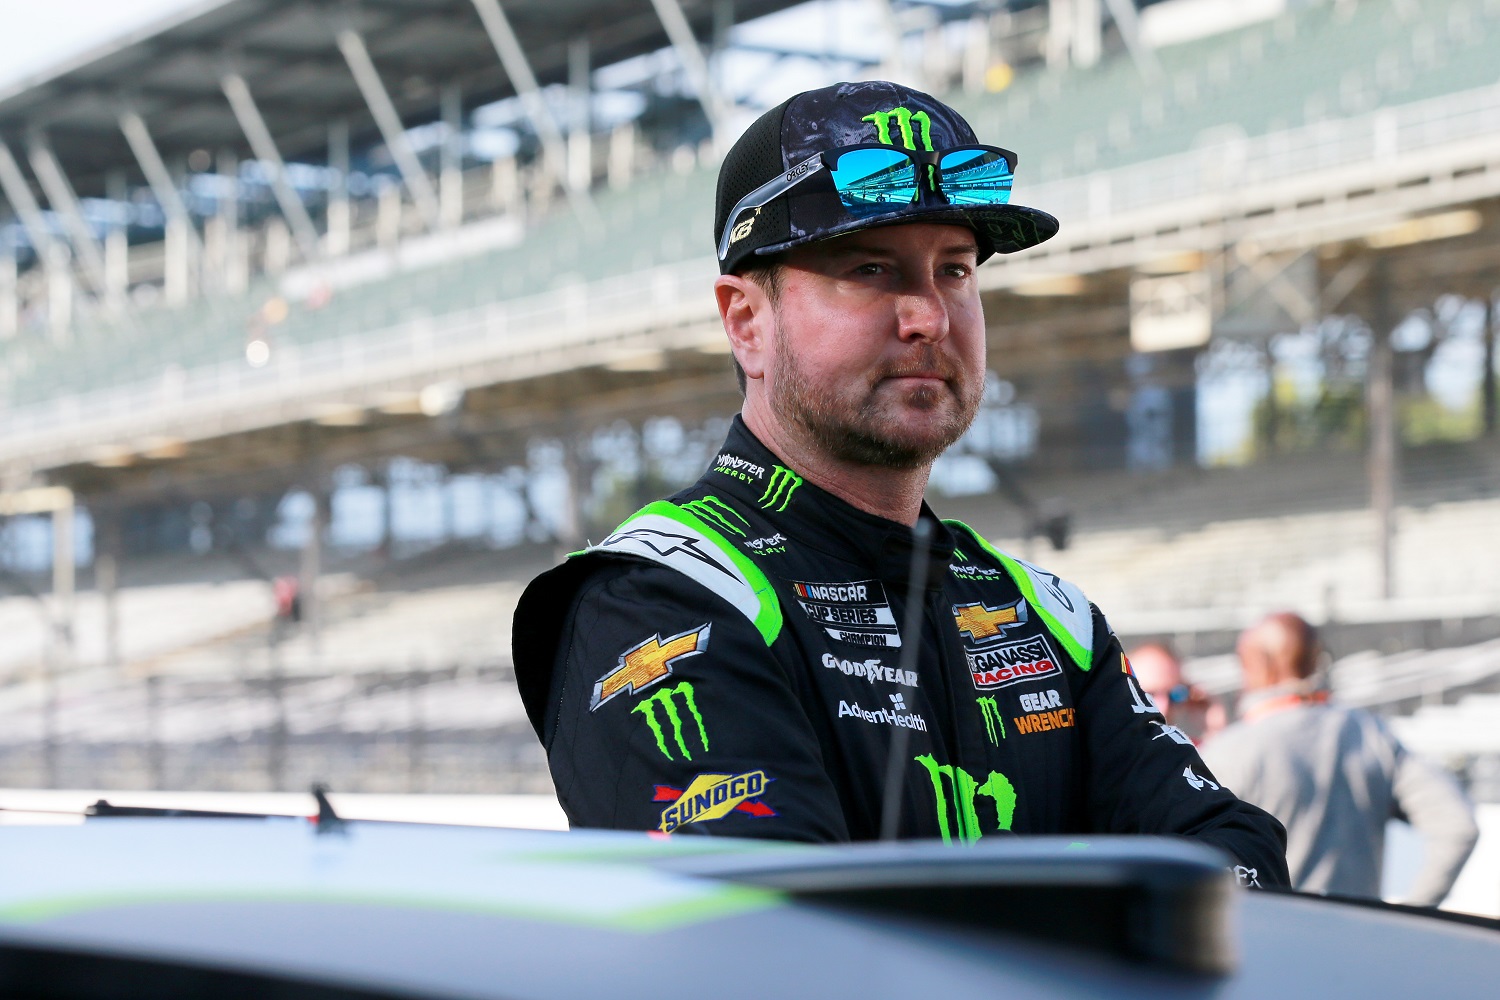 Kurt Busch waits on the grid area during qualifying for the NASCAR Cup Series Verizon 200 at the Brickyard at Indianapolis Motor Speedway on Aug. 15, 2021.